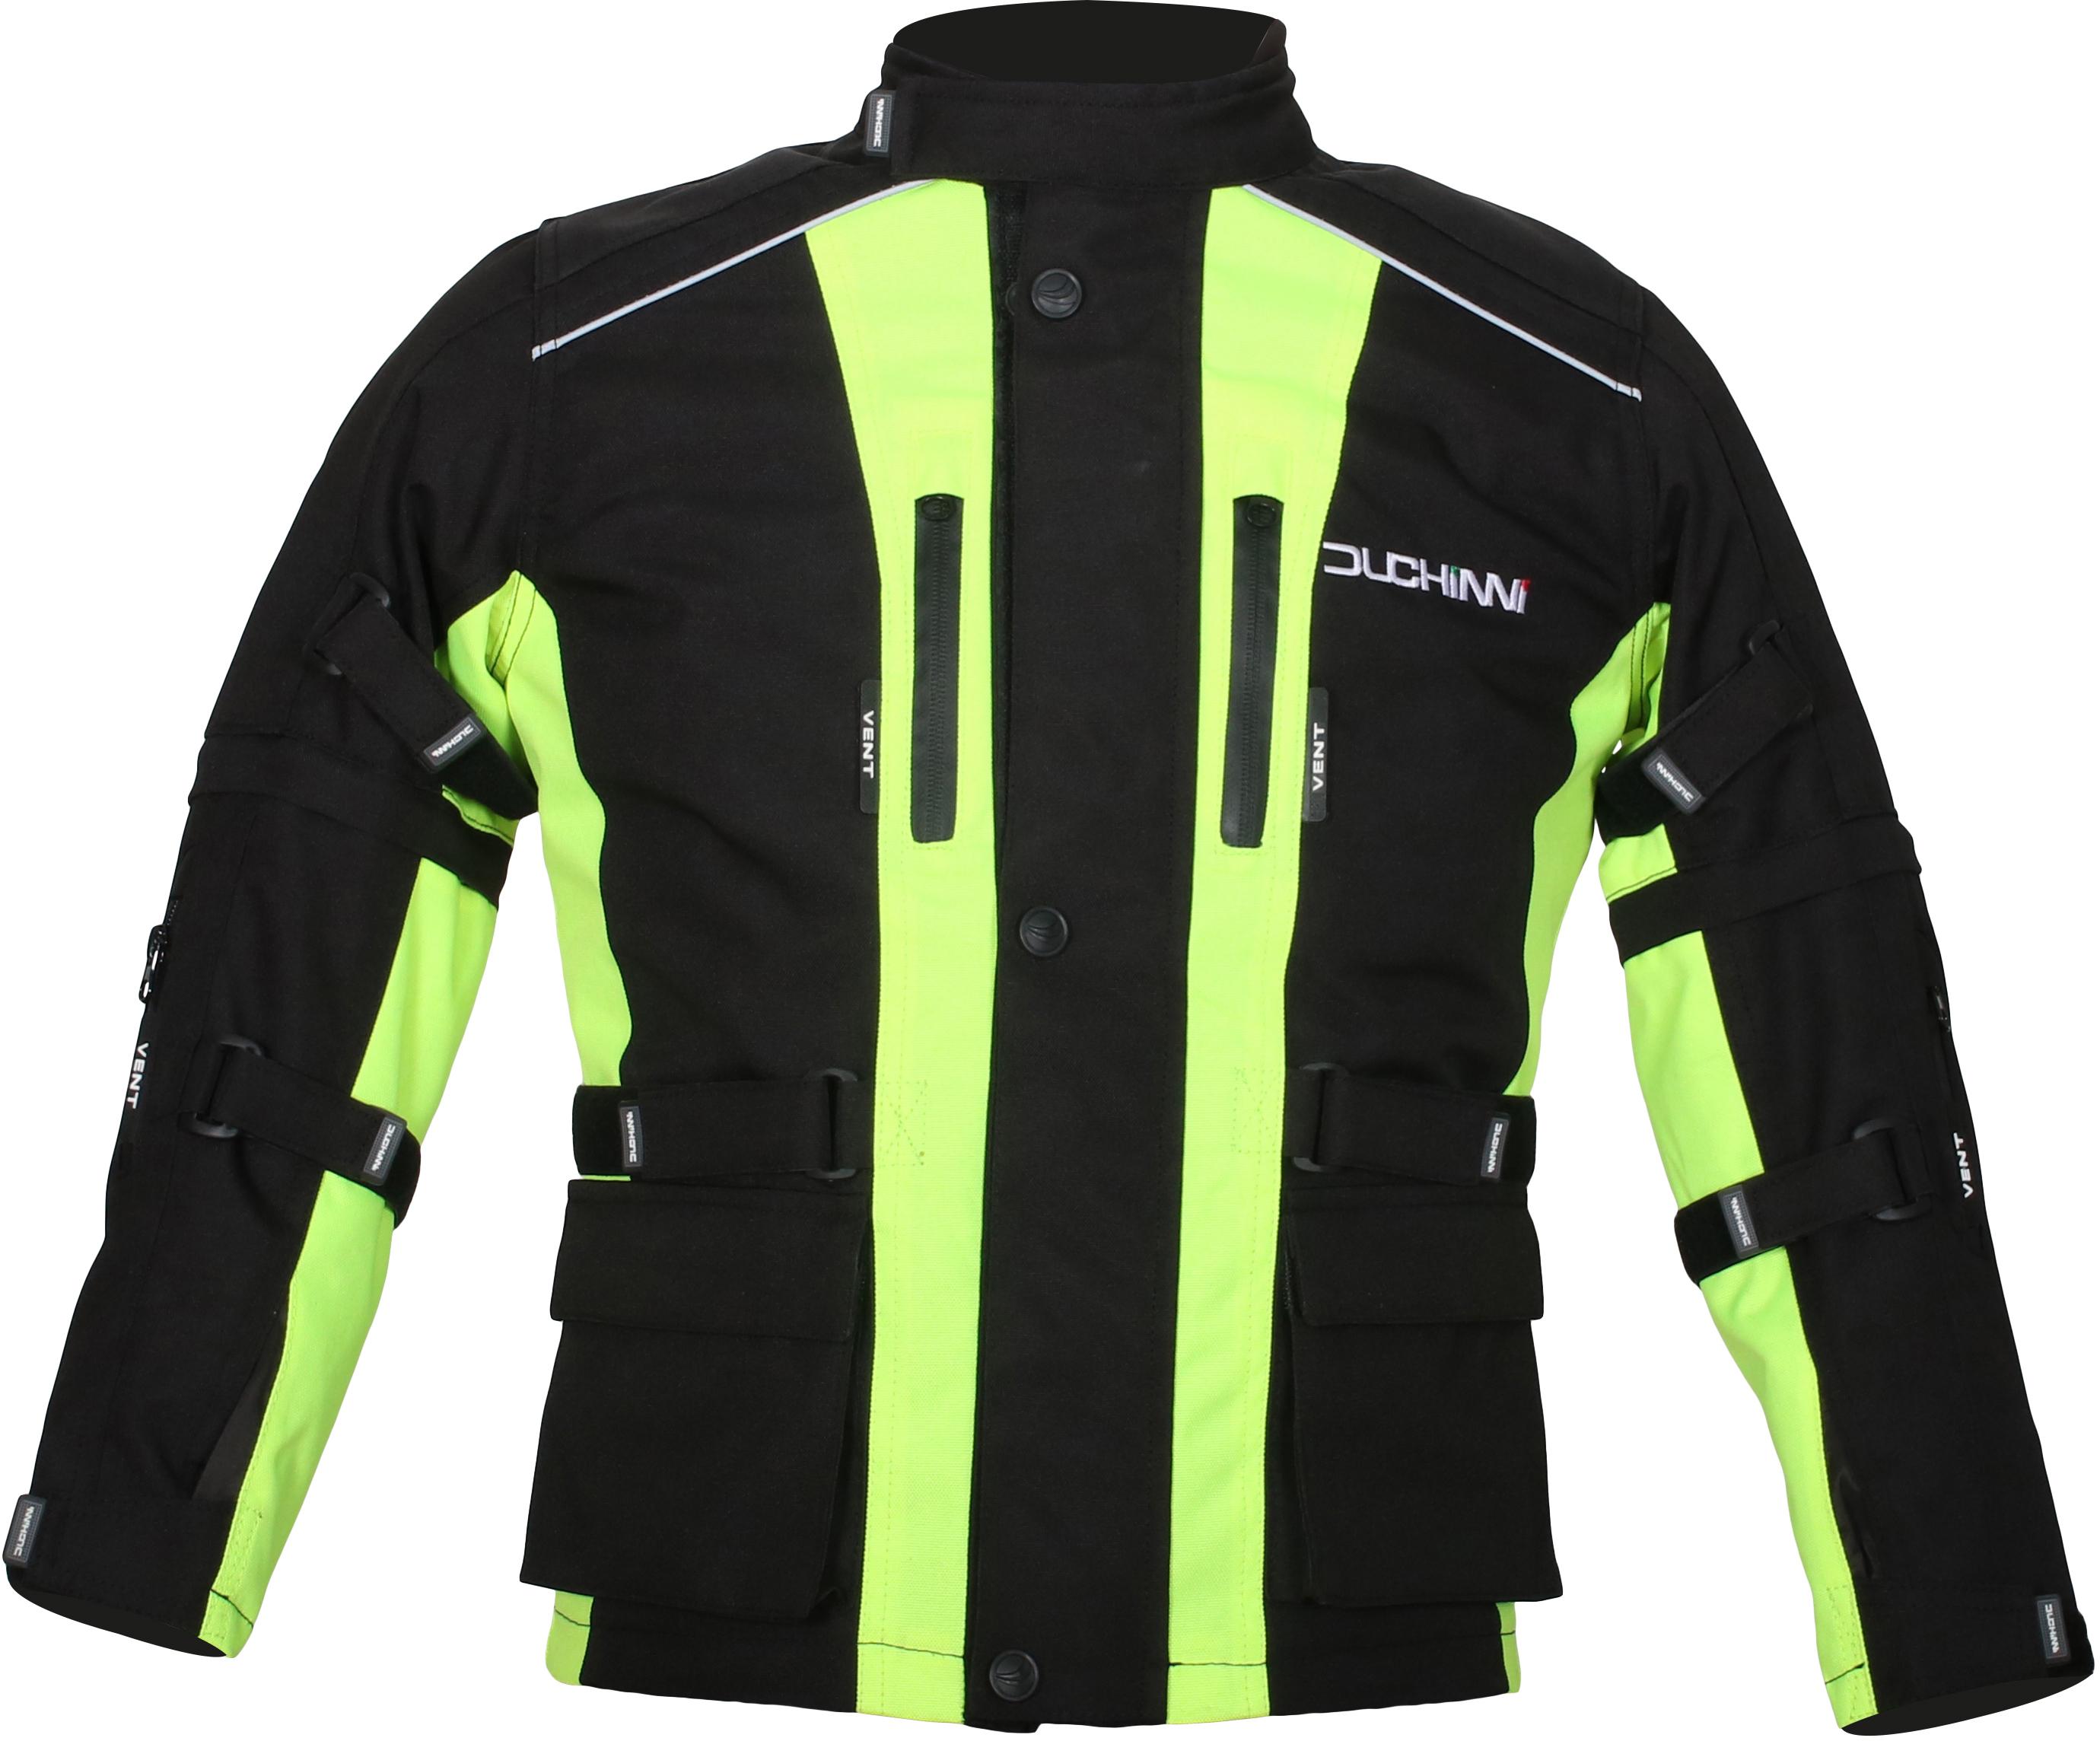 Duchinni Jago Youth Motorcycle Jacket - Black And Neon, S